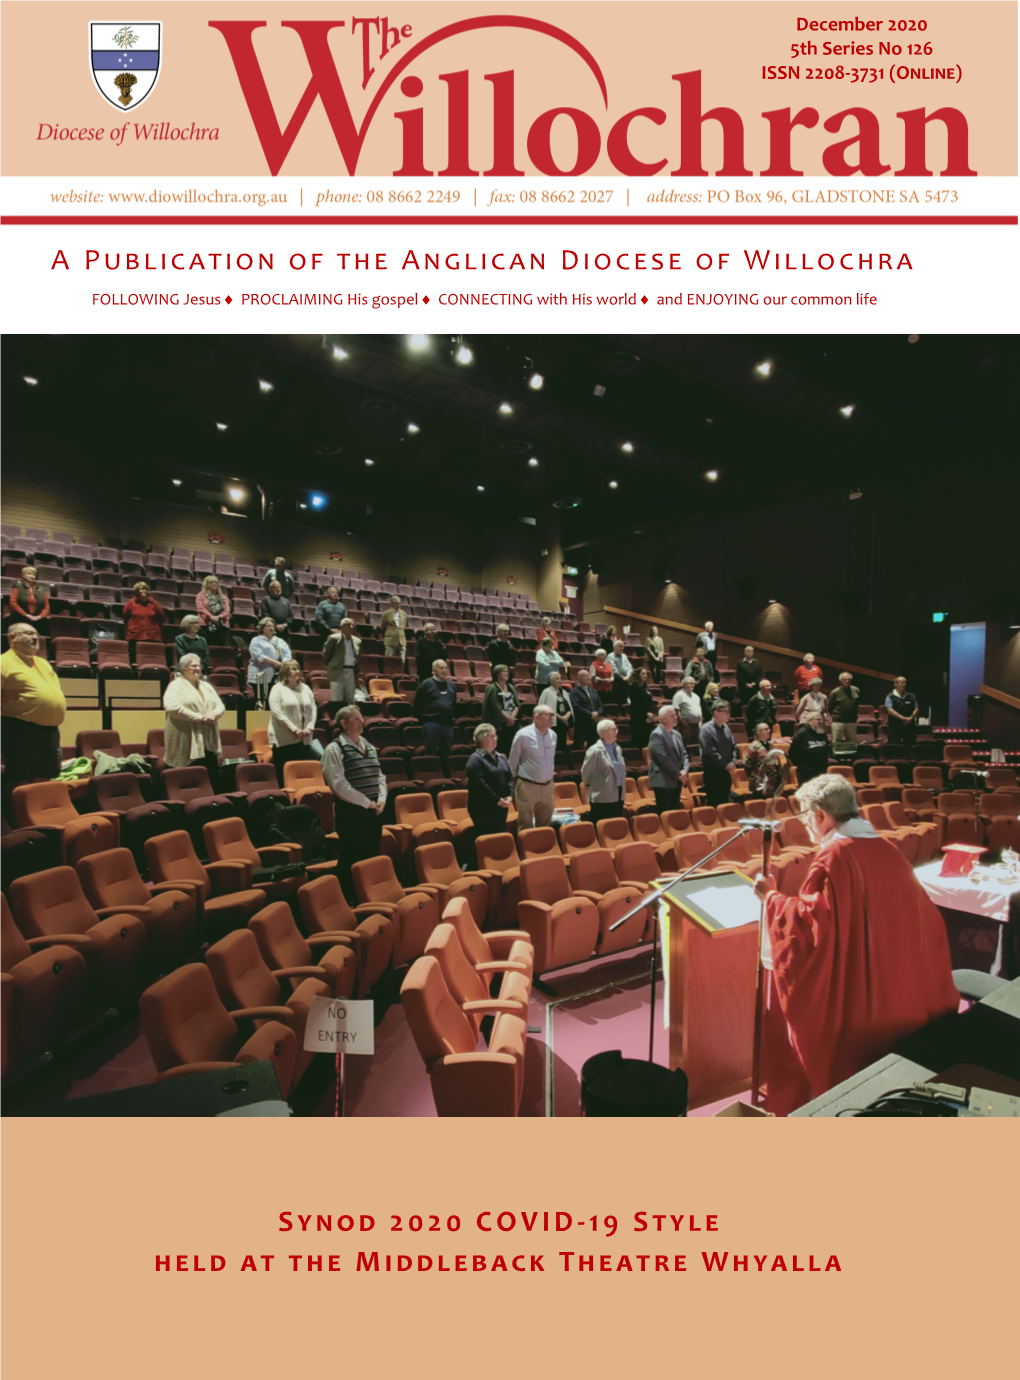 A Publication of the Anglican Diocese of Willochra Synod 2020 COVID-19